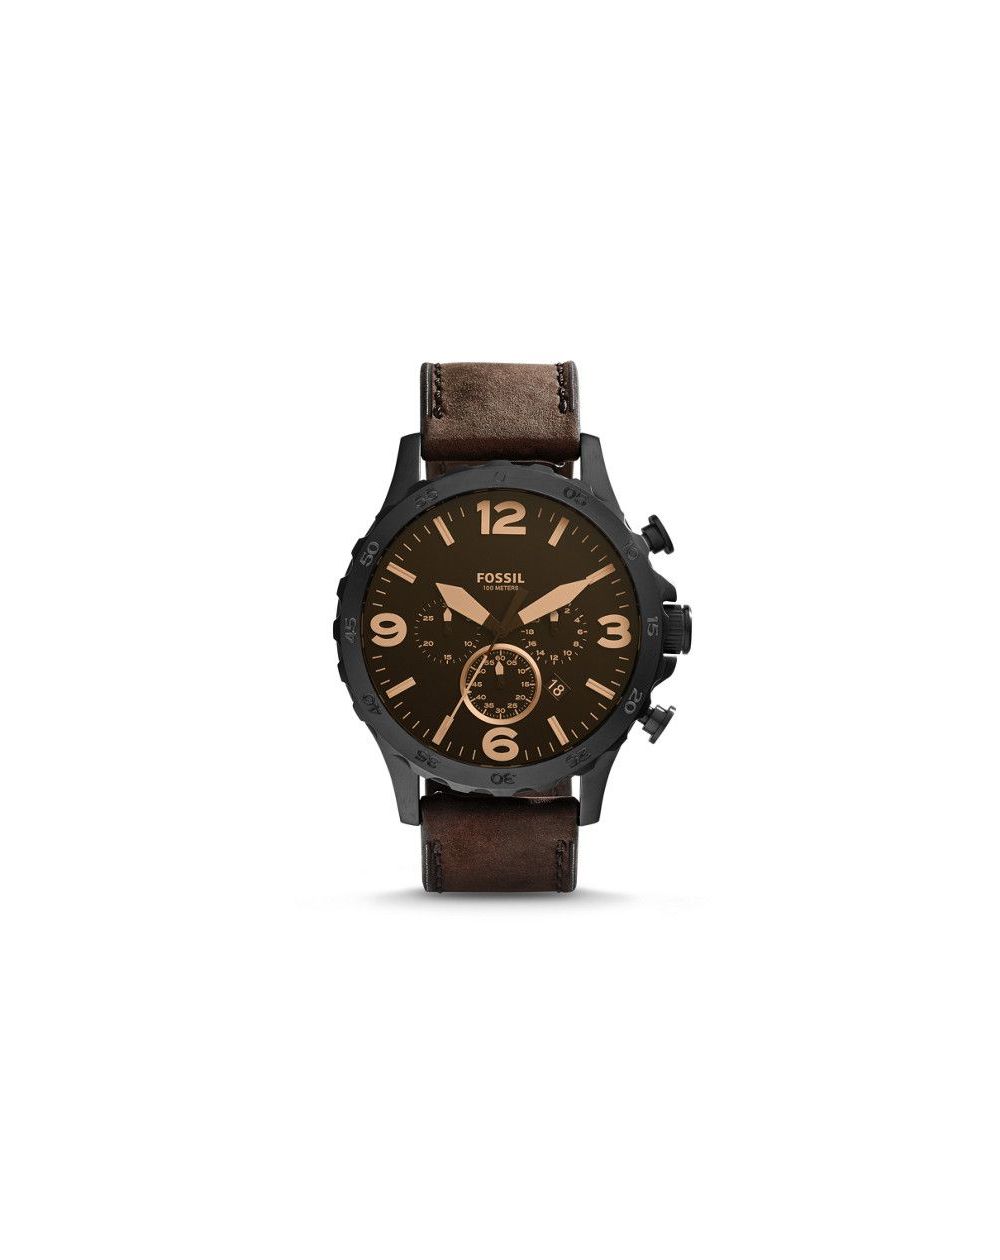 Fossil - Nate Watch Chronograph Leather - Brown